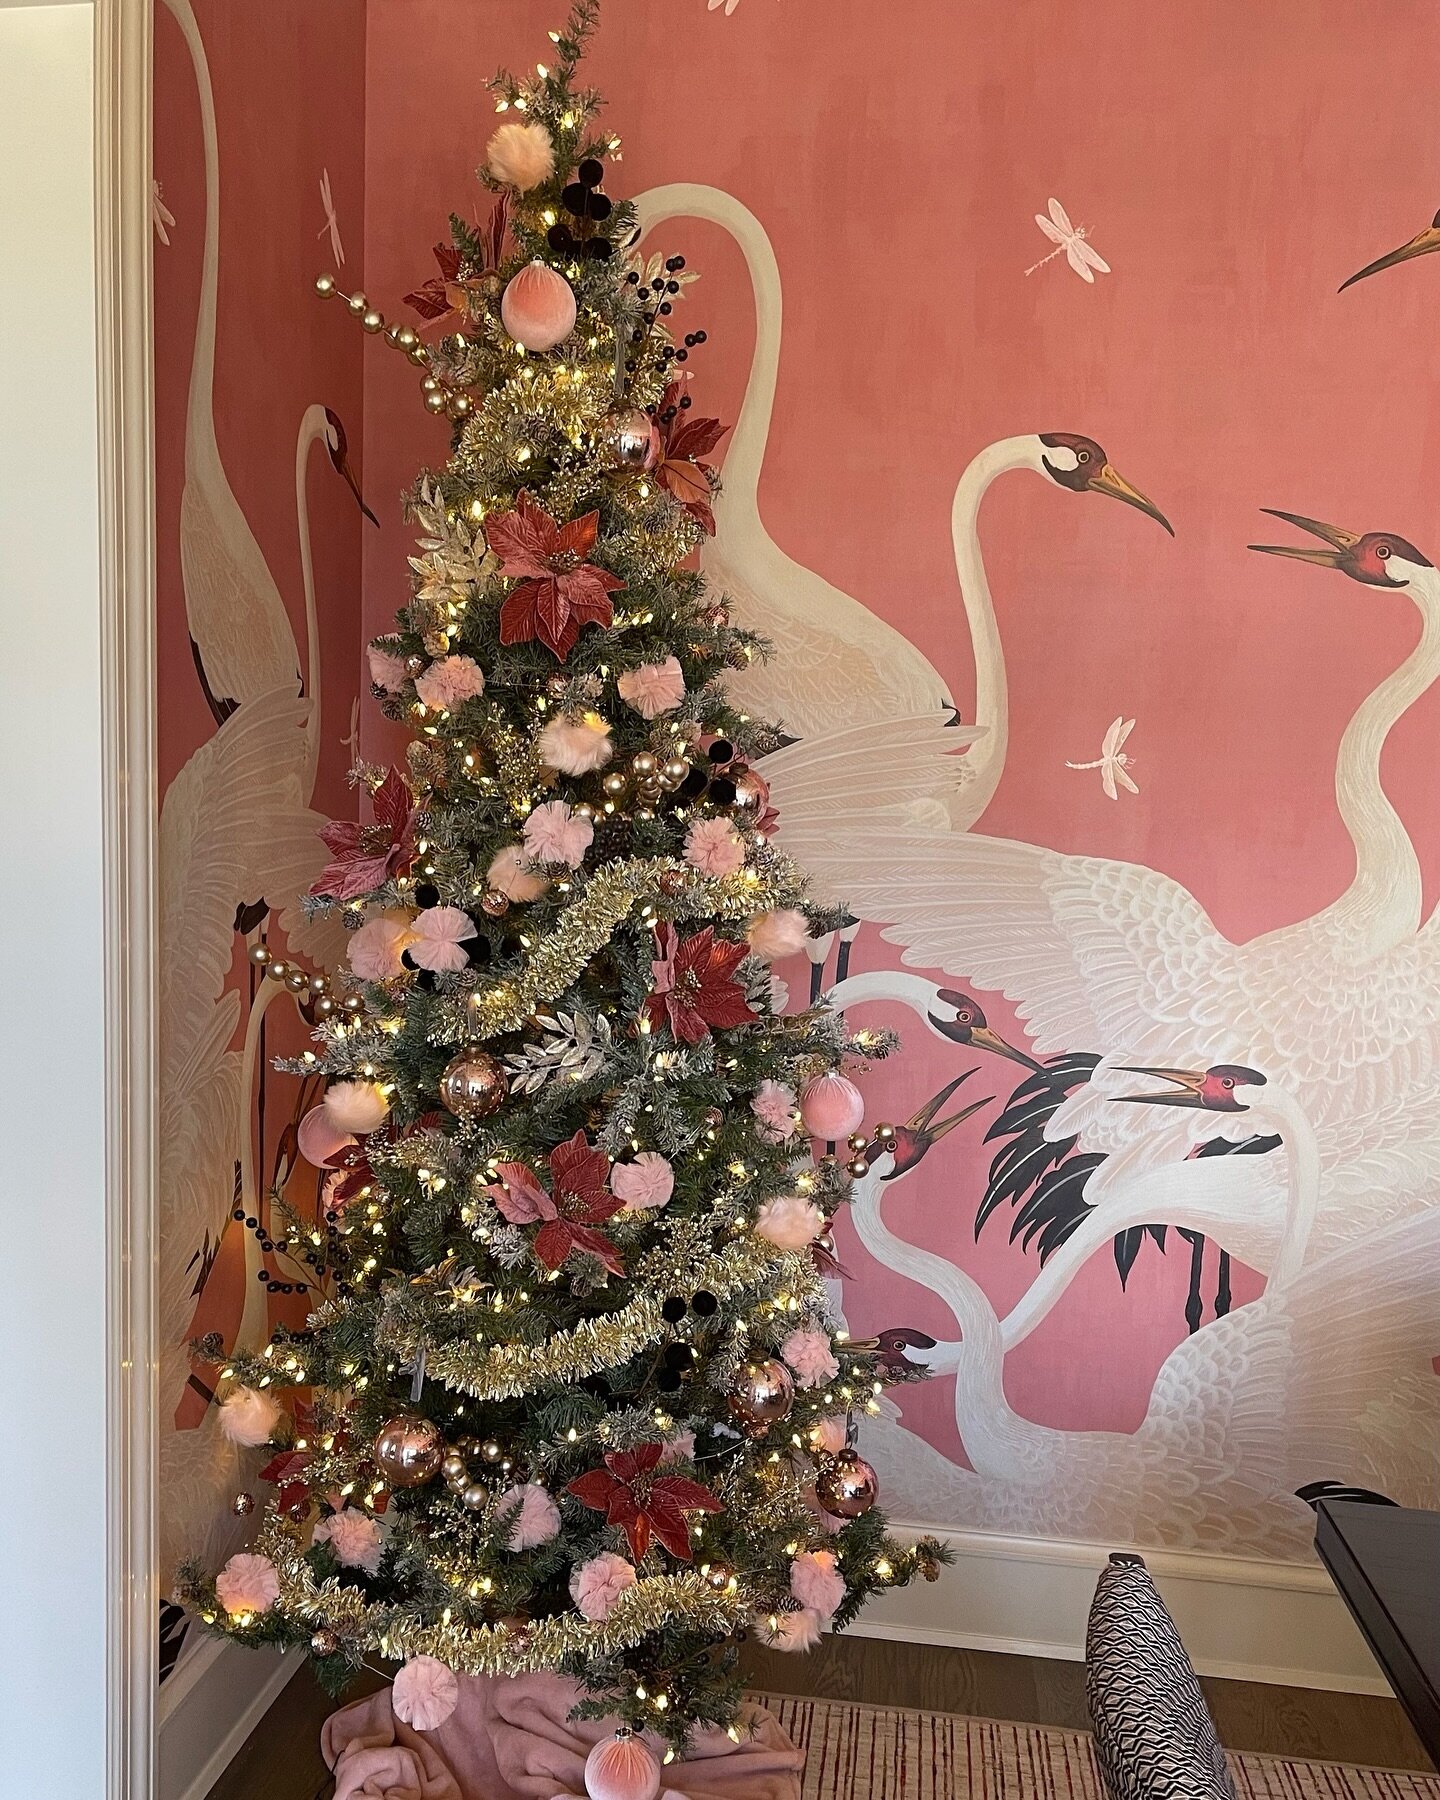 Gucci wallpaper and a matching Christmas tree? Yes please!🎄 Merry Christmas Eve from the Roux MacNeill team! 

#rouxmacstudio #rouxmacneillstudio